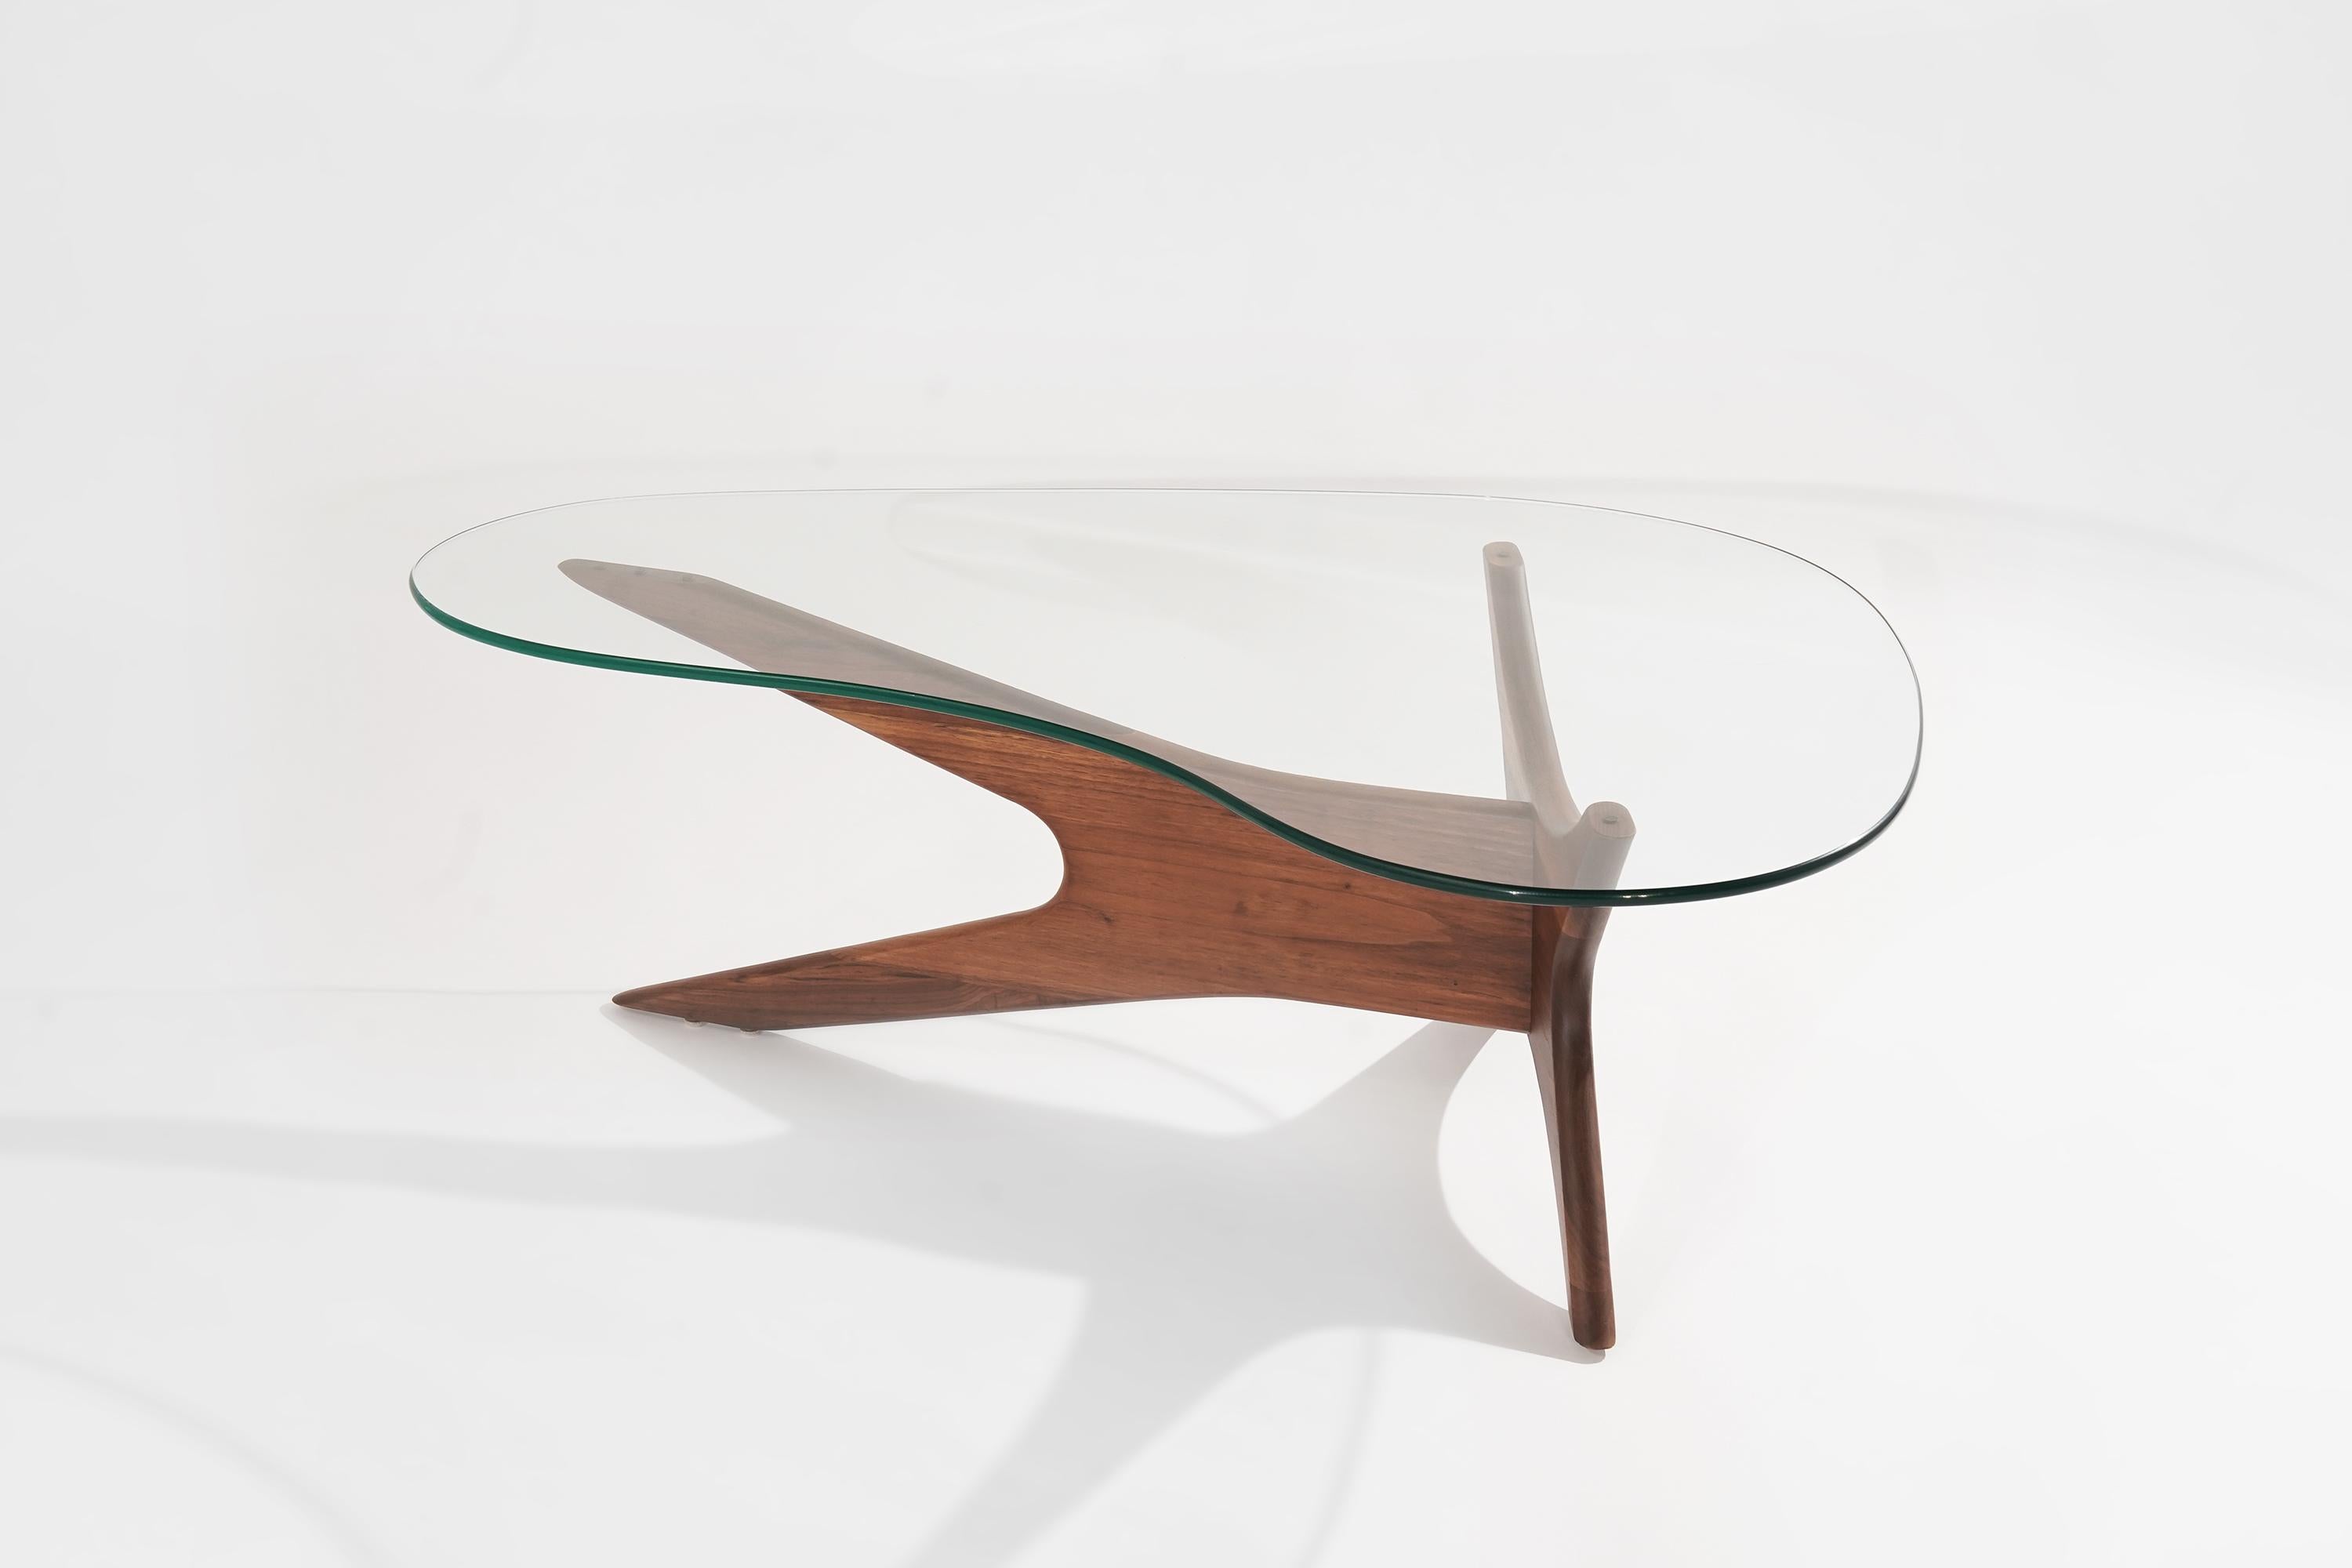 Biomorphic walnut and glass coffee table by Adrian Pearsall for Craft Associates, circa 1950s. 
Sculptural walnut base fully restored. New custom-made kidney-shaped glass top.

Other designers from this period include Ico Parisi, Vladimir Kagan,